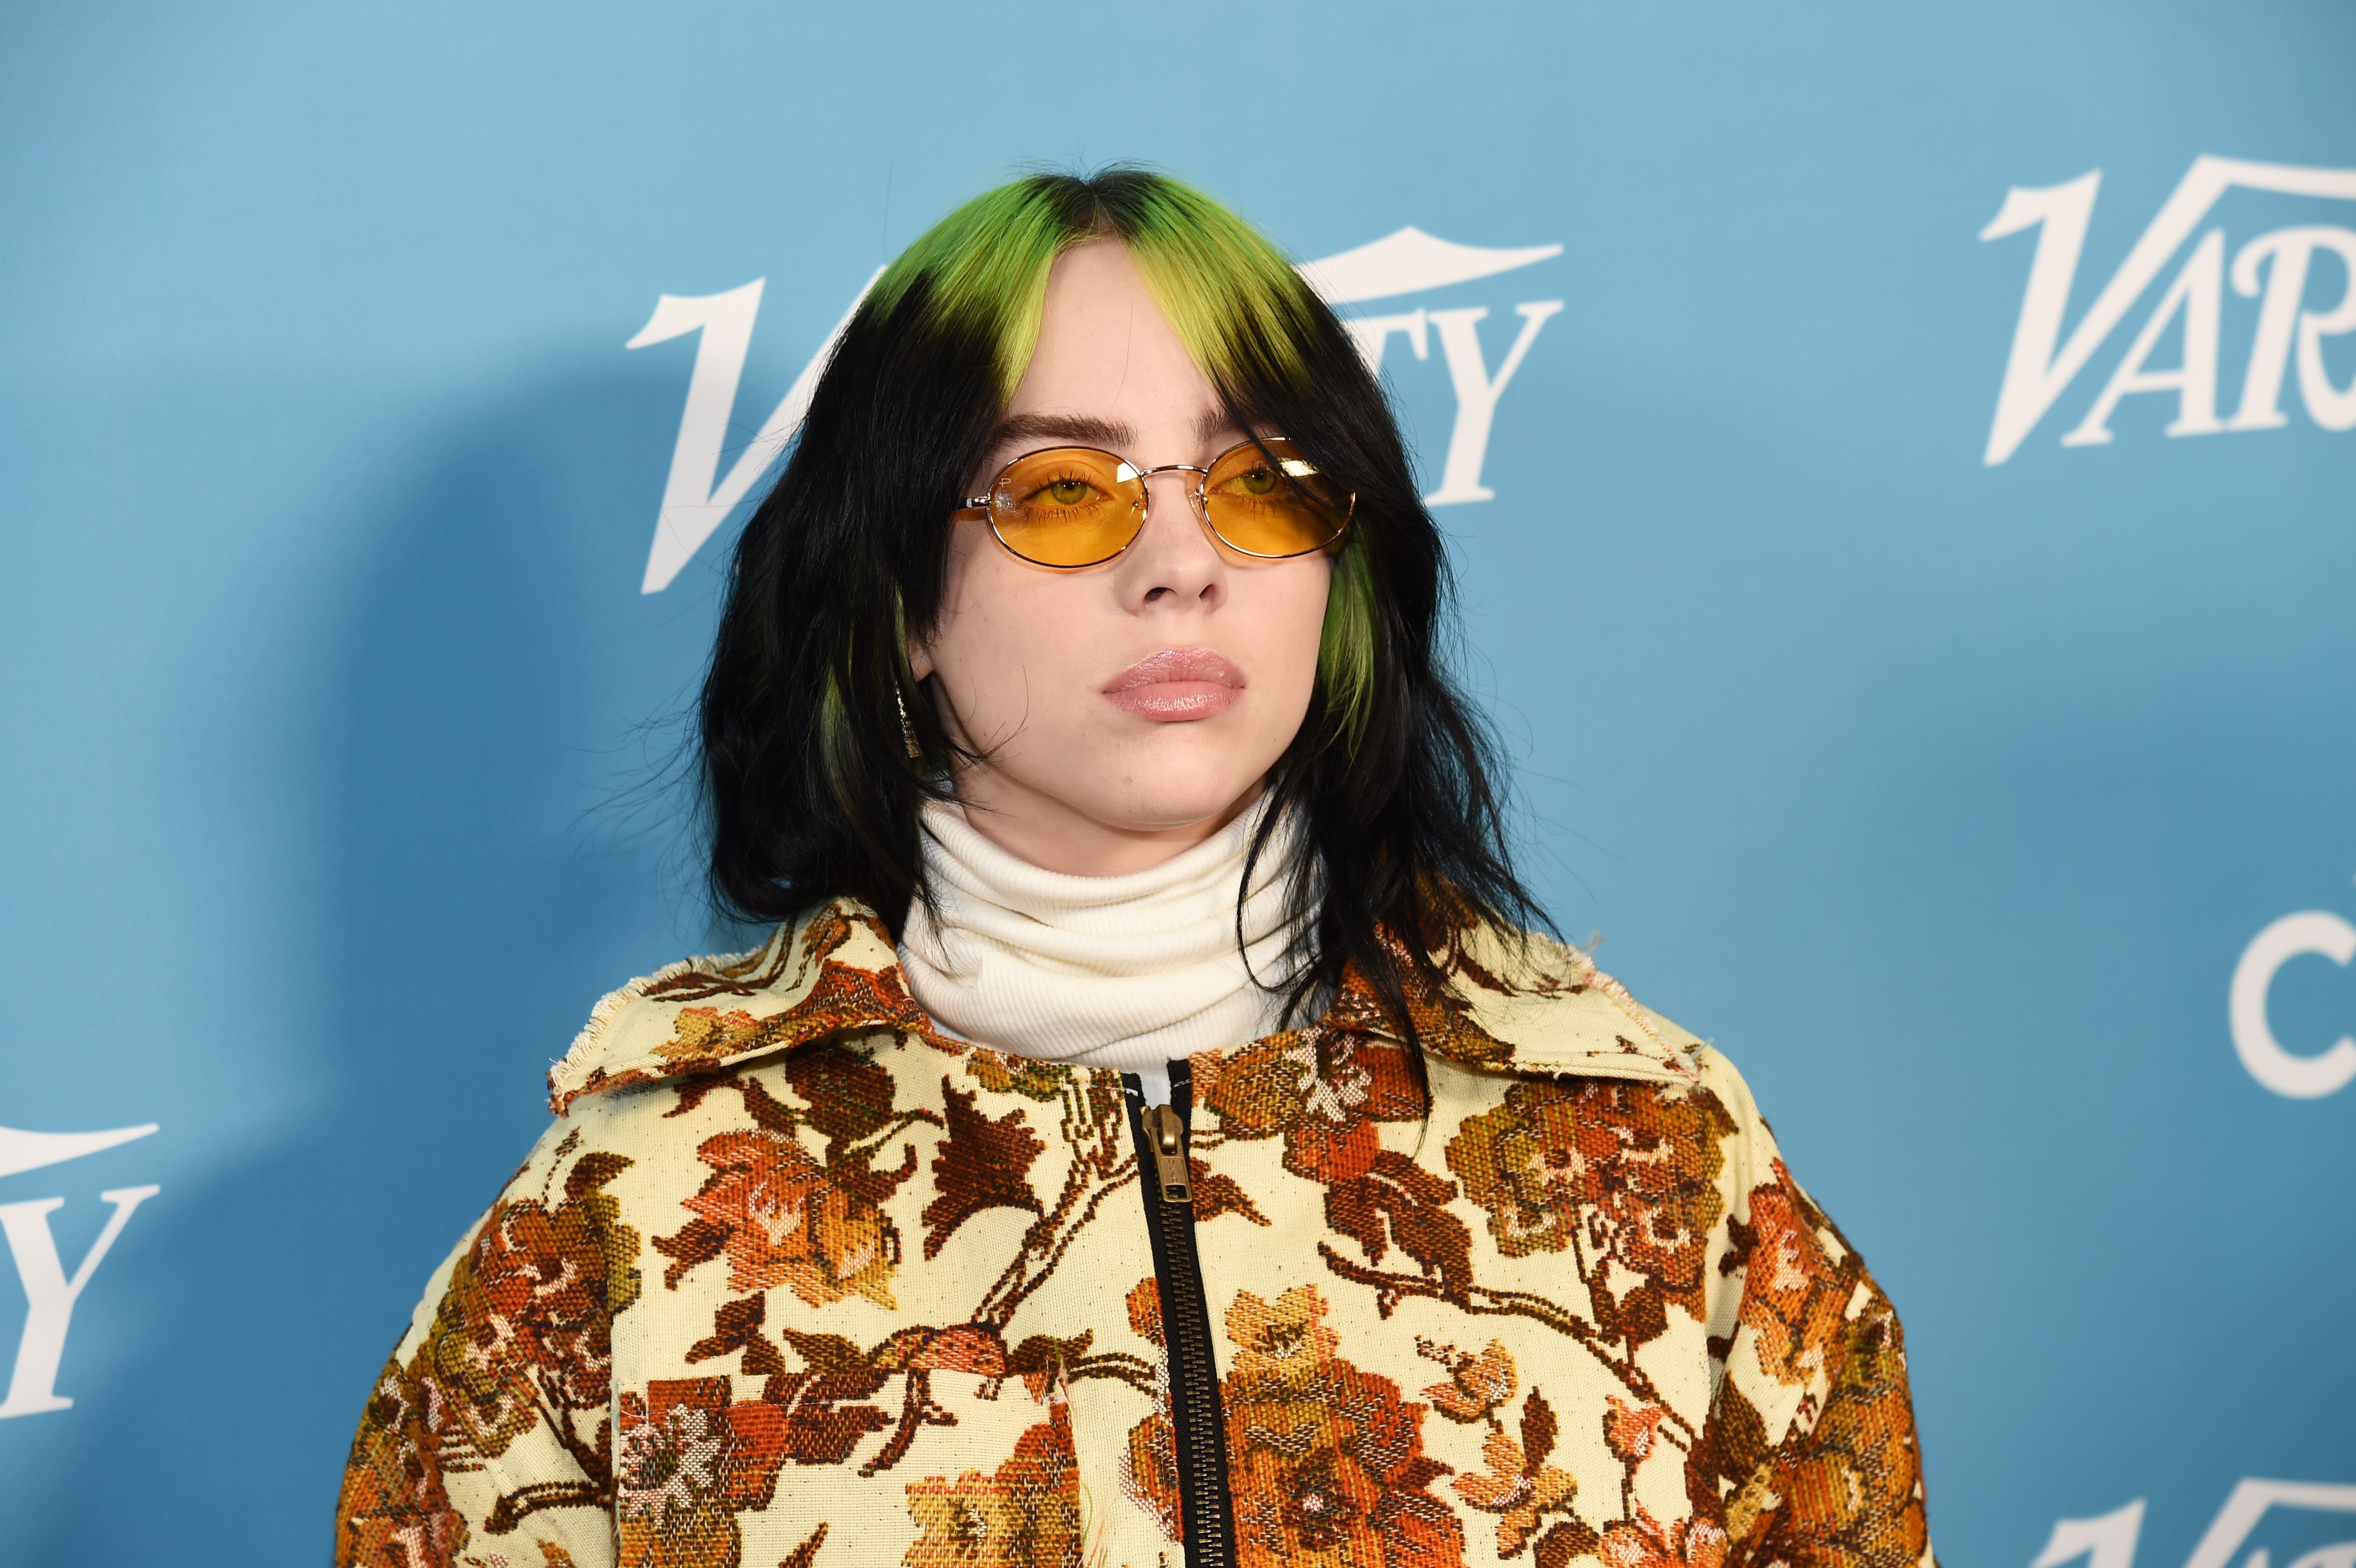 Billie Eilish's iconic blue hair and outfit - wide 3